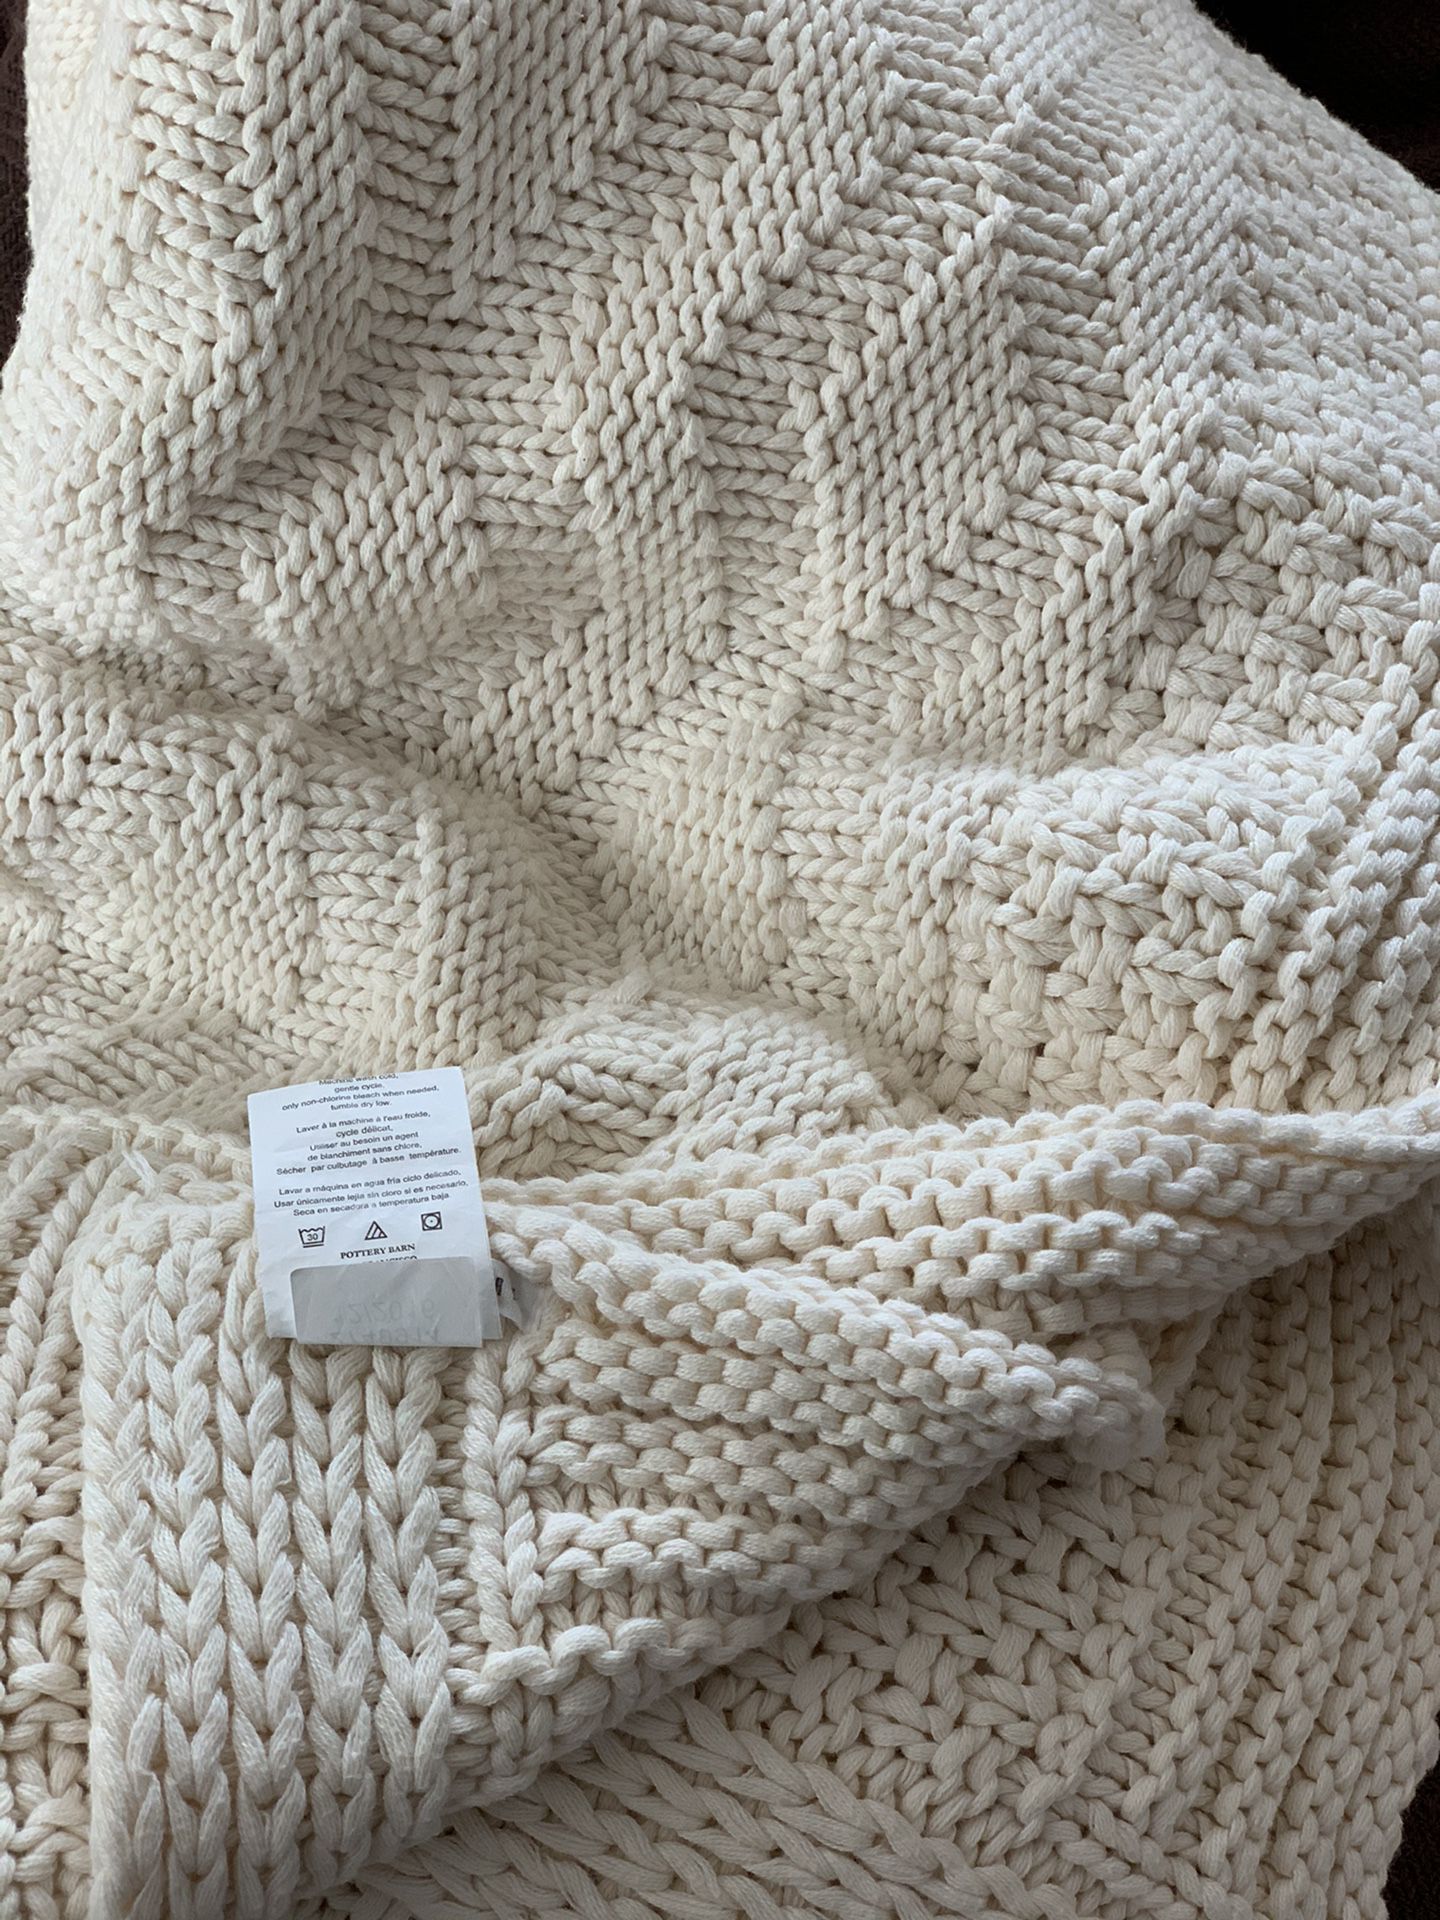 Pottery Barn Chunky Knit Throw Blanket for Sale in Puyallup, WA - OfferUp